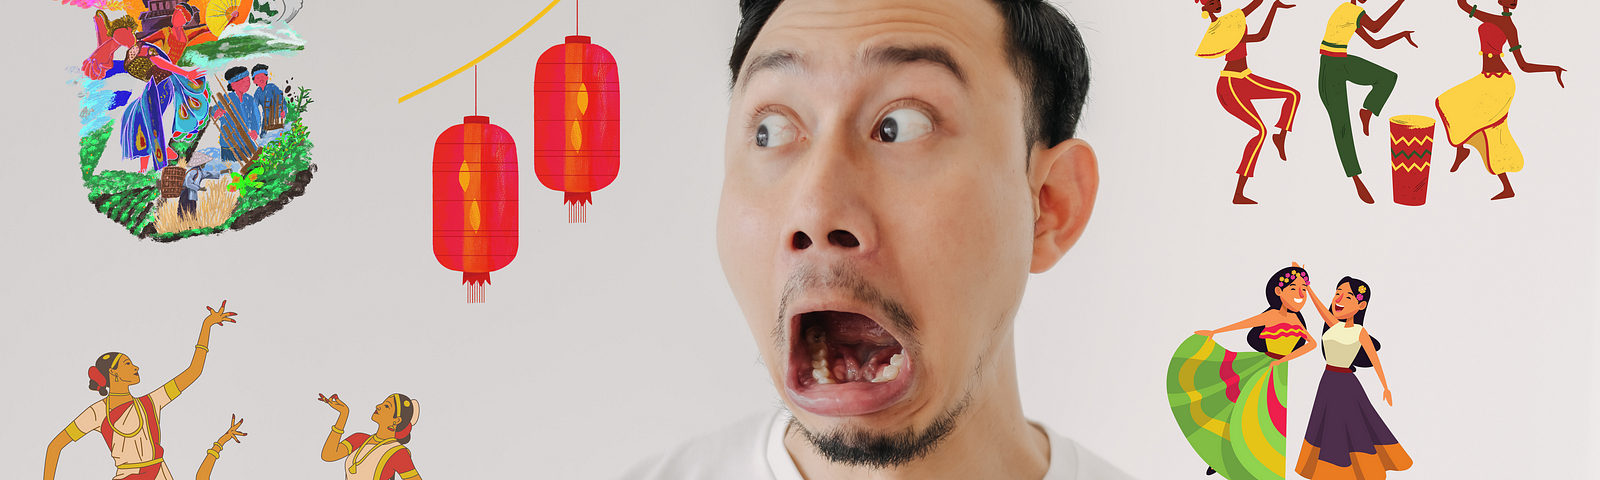 Shocked man with icons of different cultures floating around his head